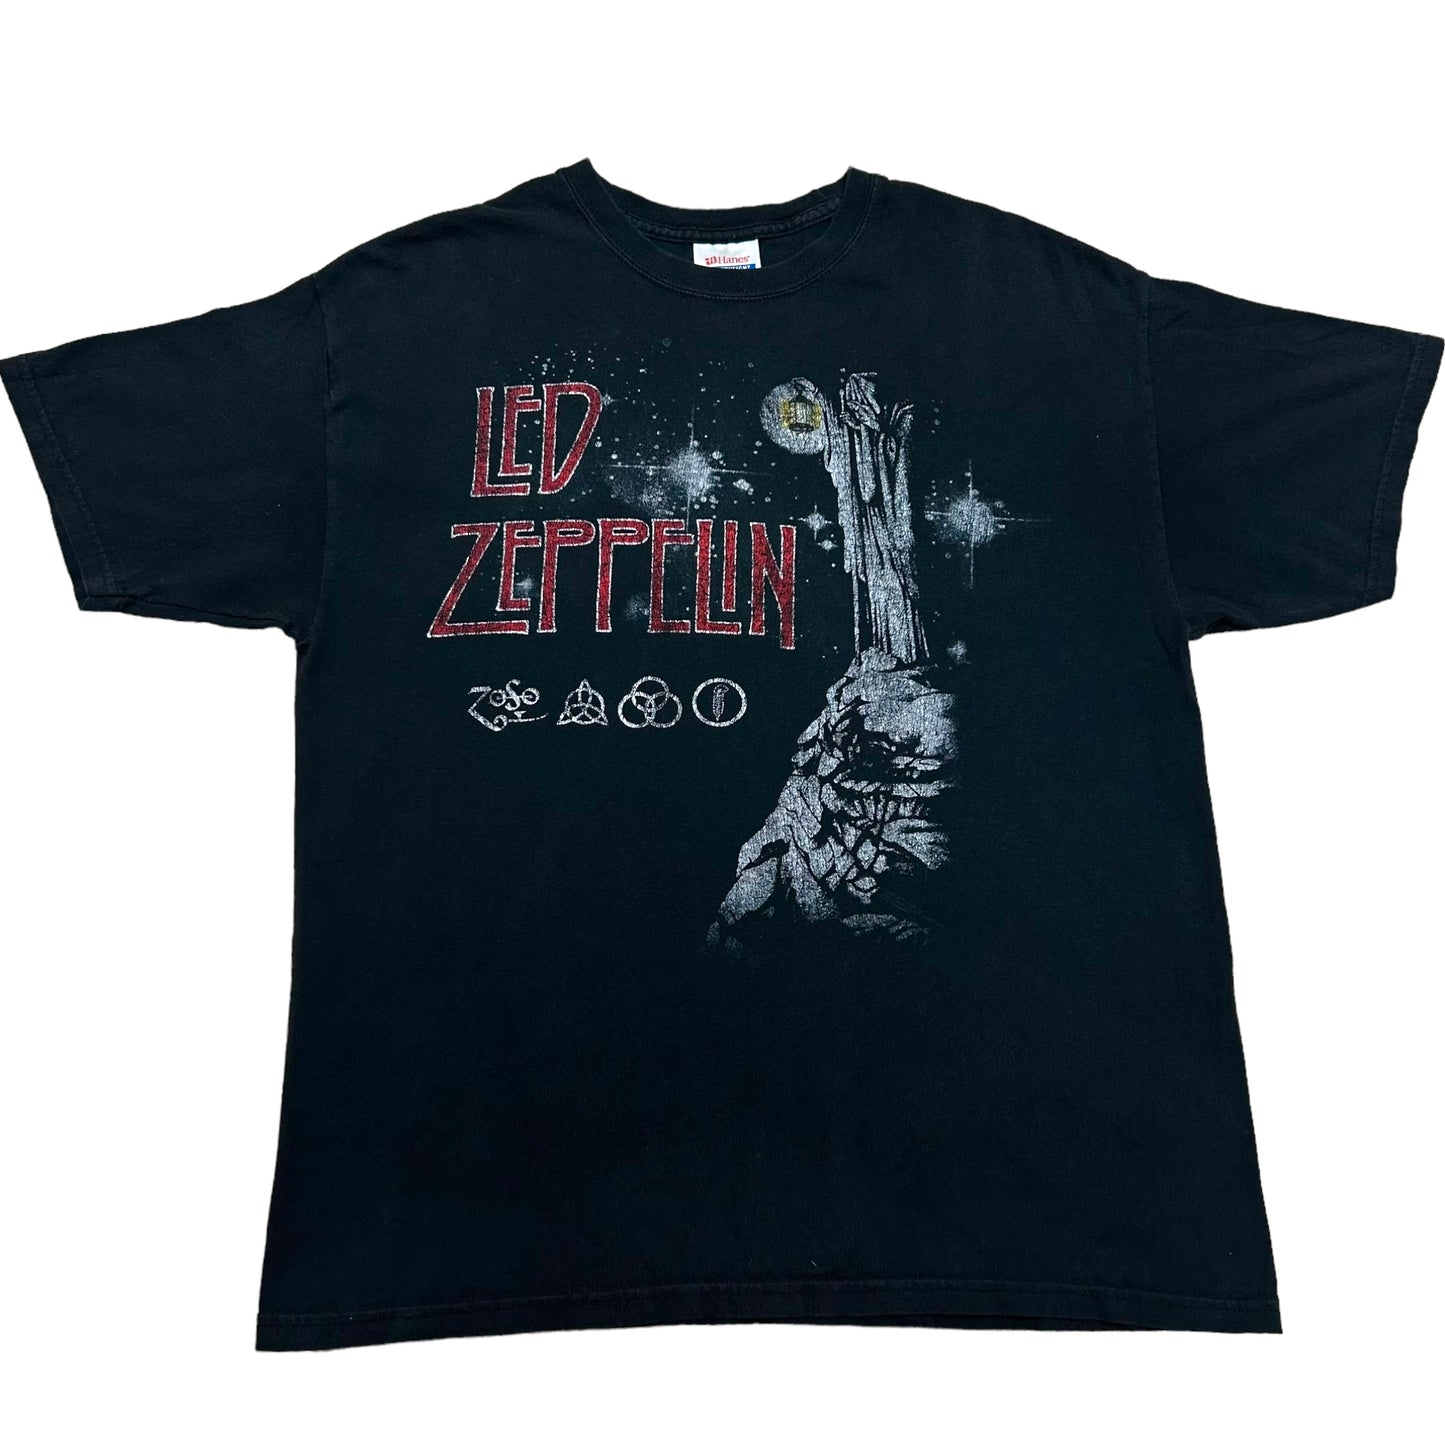 Late 2000s Led Zeppelin Black Graphic T-Shirt - Size Large